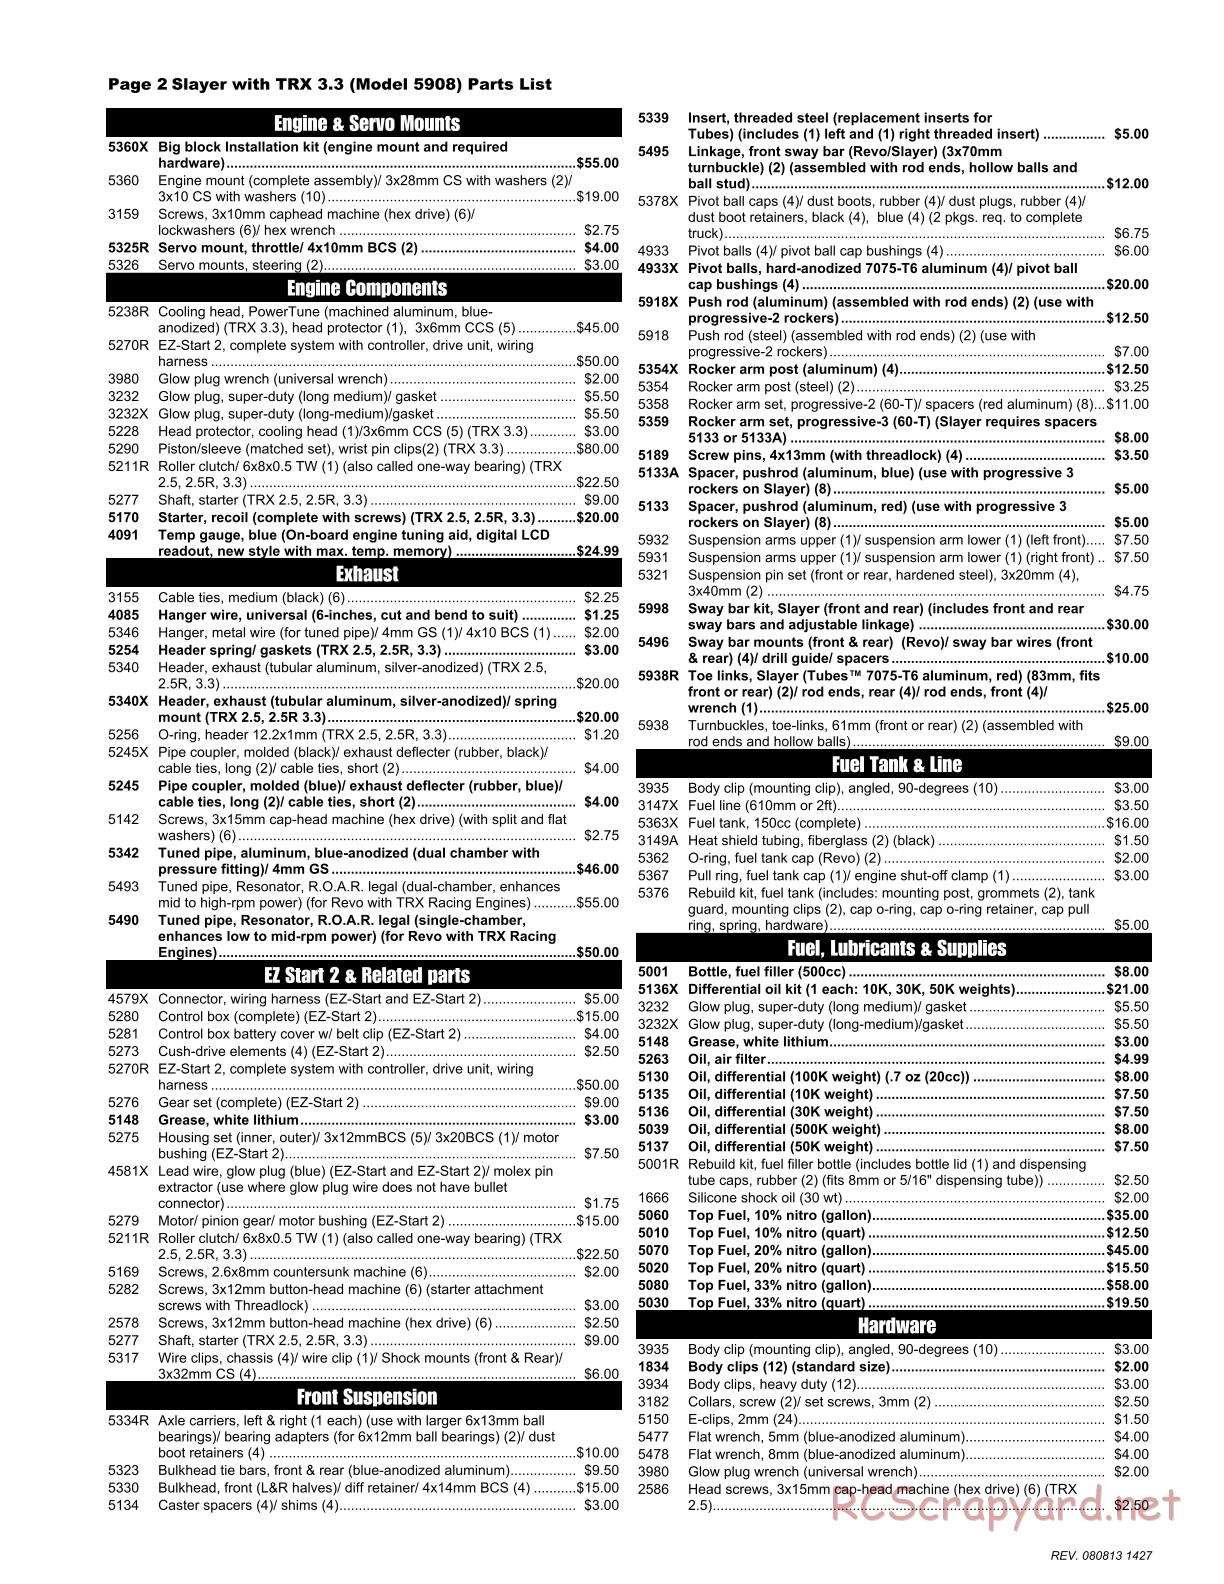 Traxxas - Slayer Pro 4WD (2008) - Parts List - Page 2